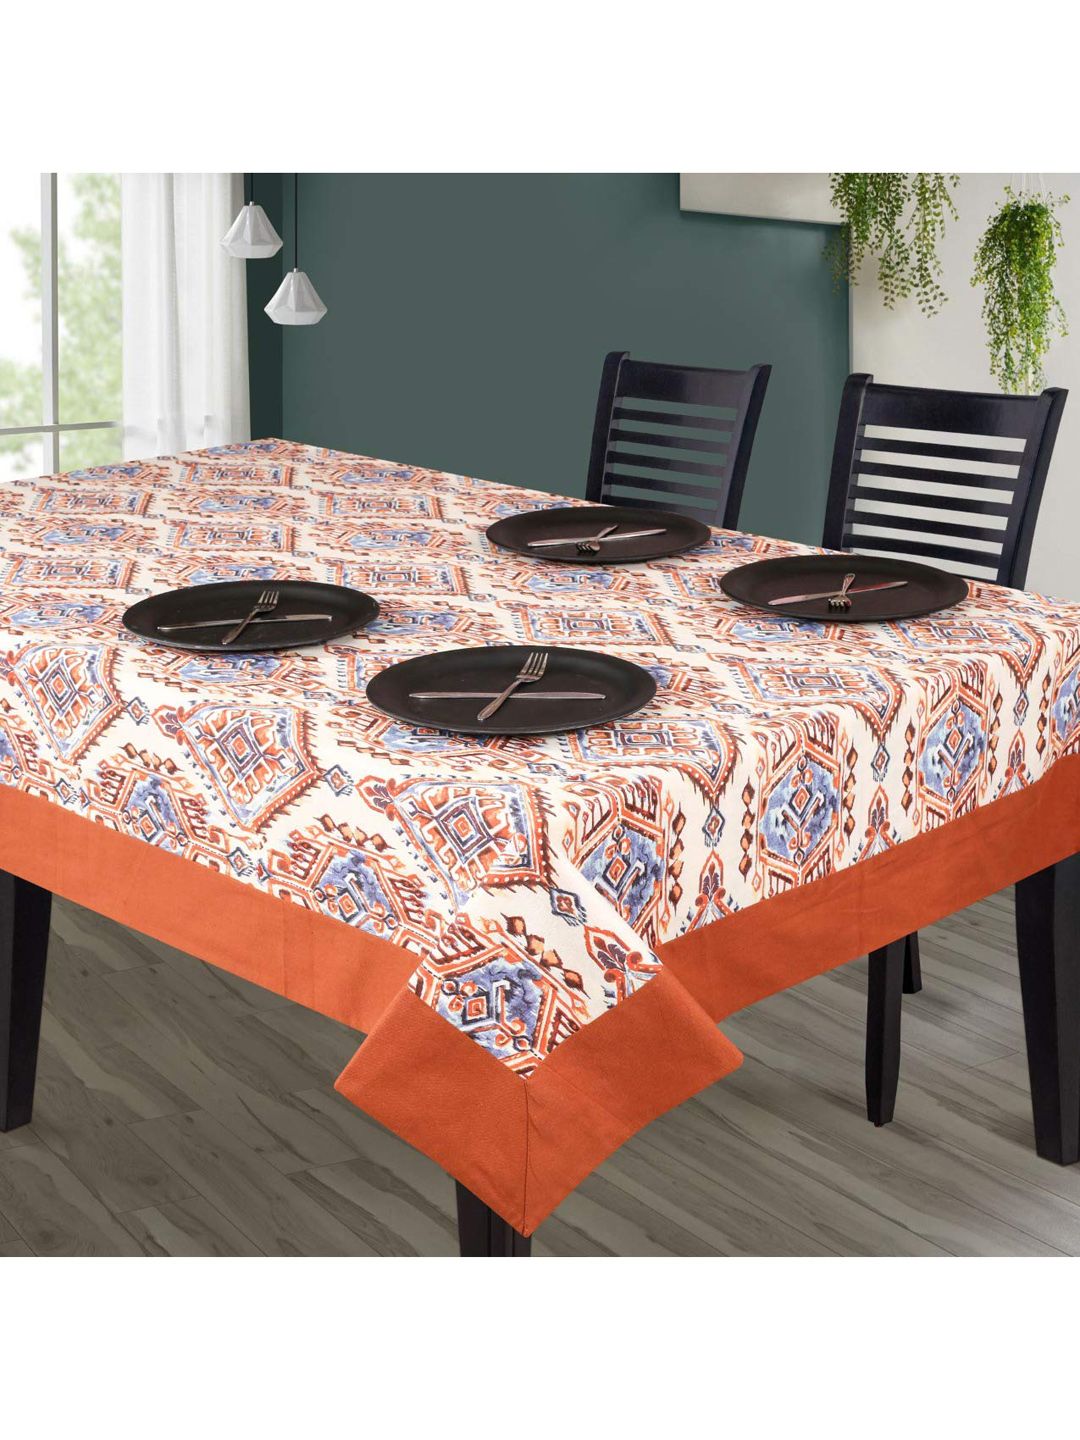 SHADES of LIFE Rust & Cream Floral Printed Cotton Center Table Cover Price in India